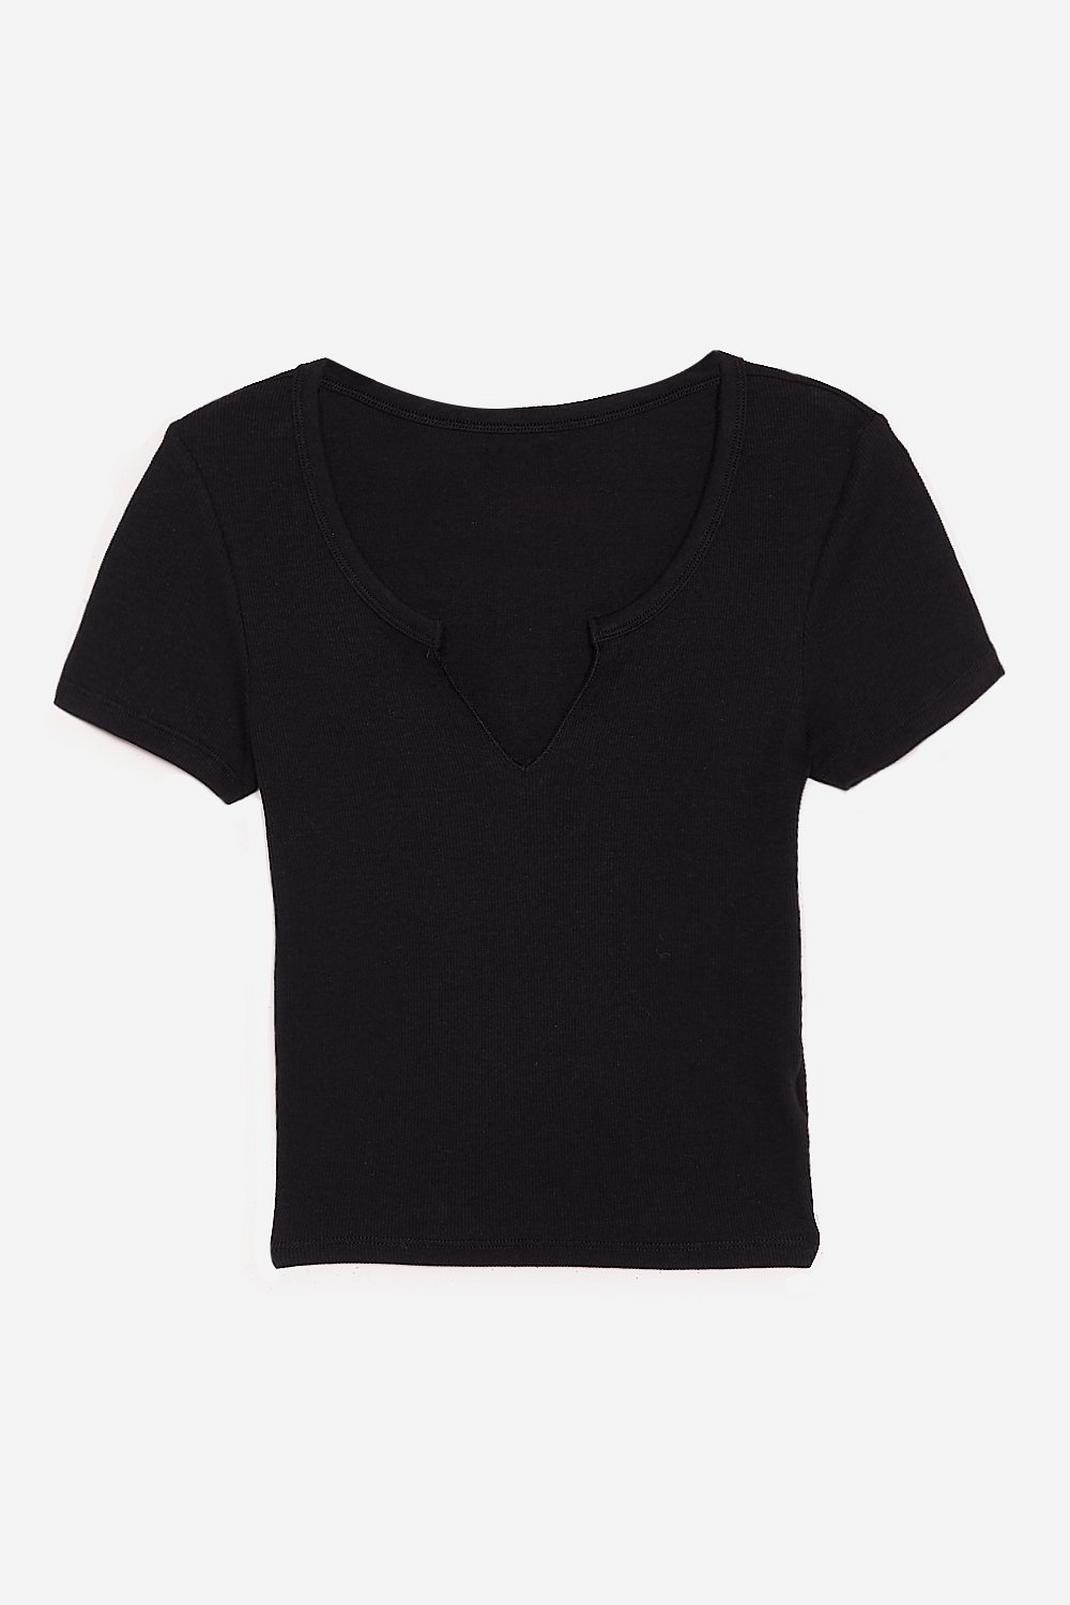 Black V Cut Fitted Cropped T-Shirt image number 1